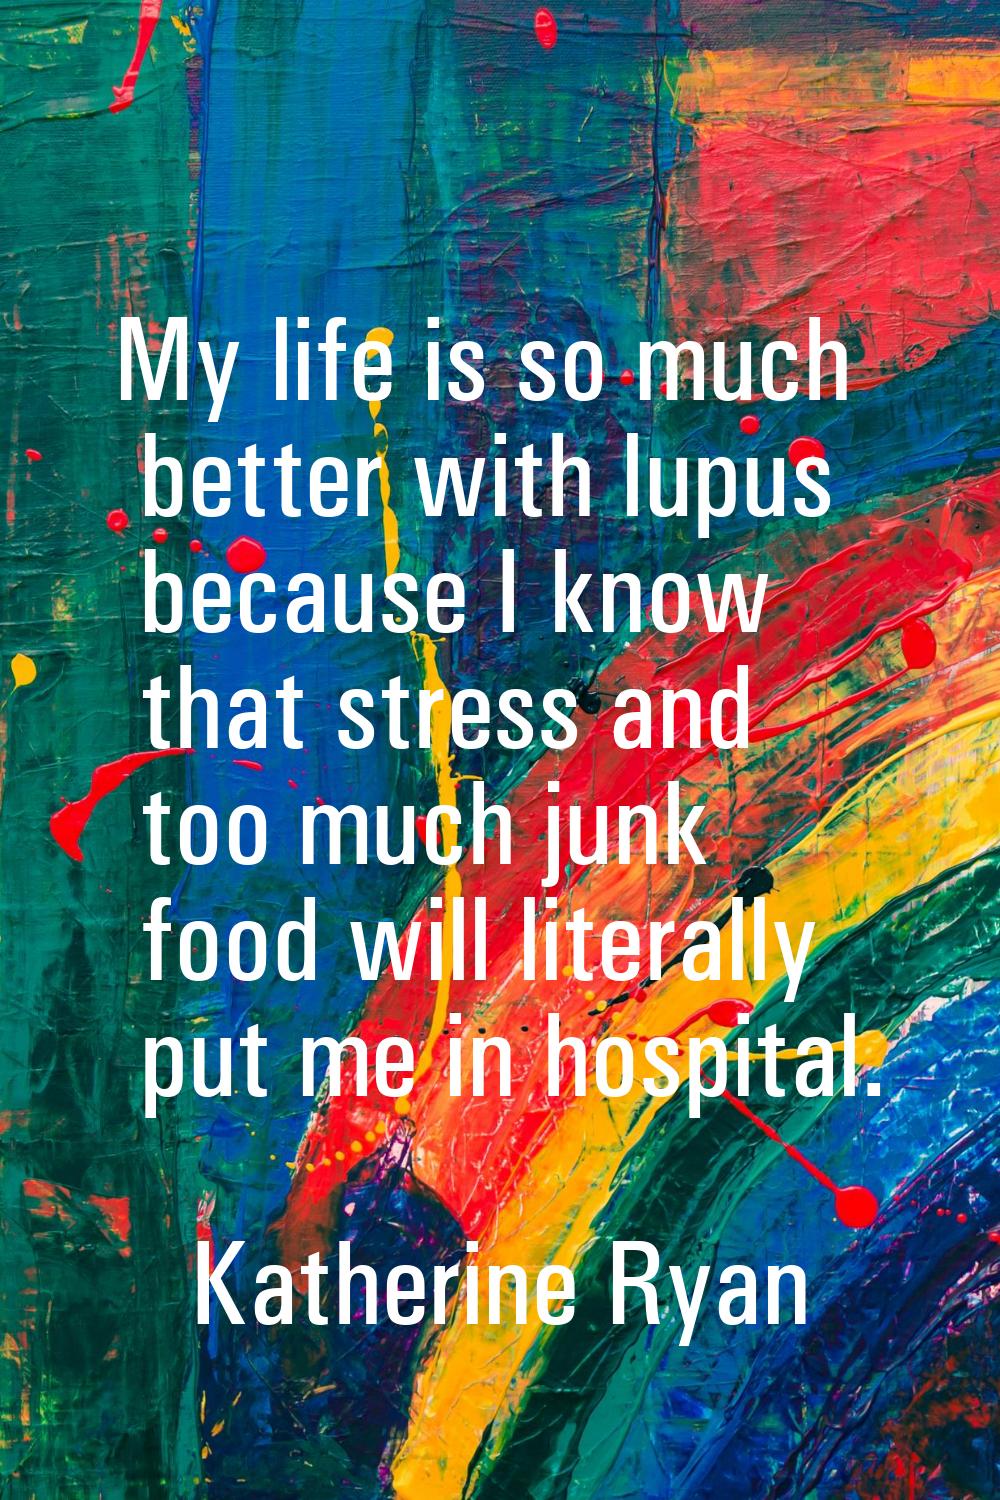 My life is so much better with lupus because I know that stress and too much junk food will literal